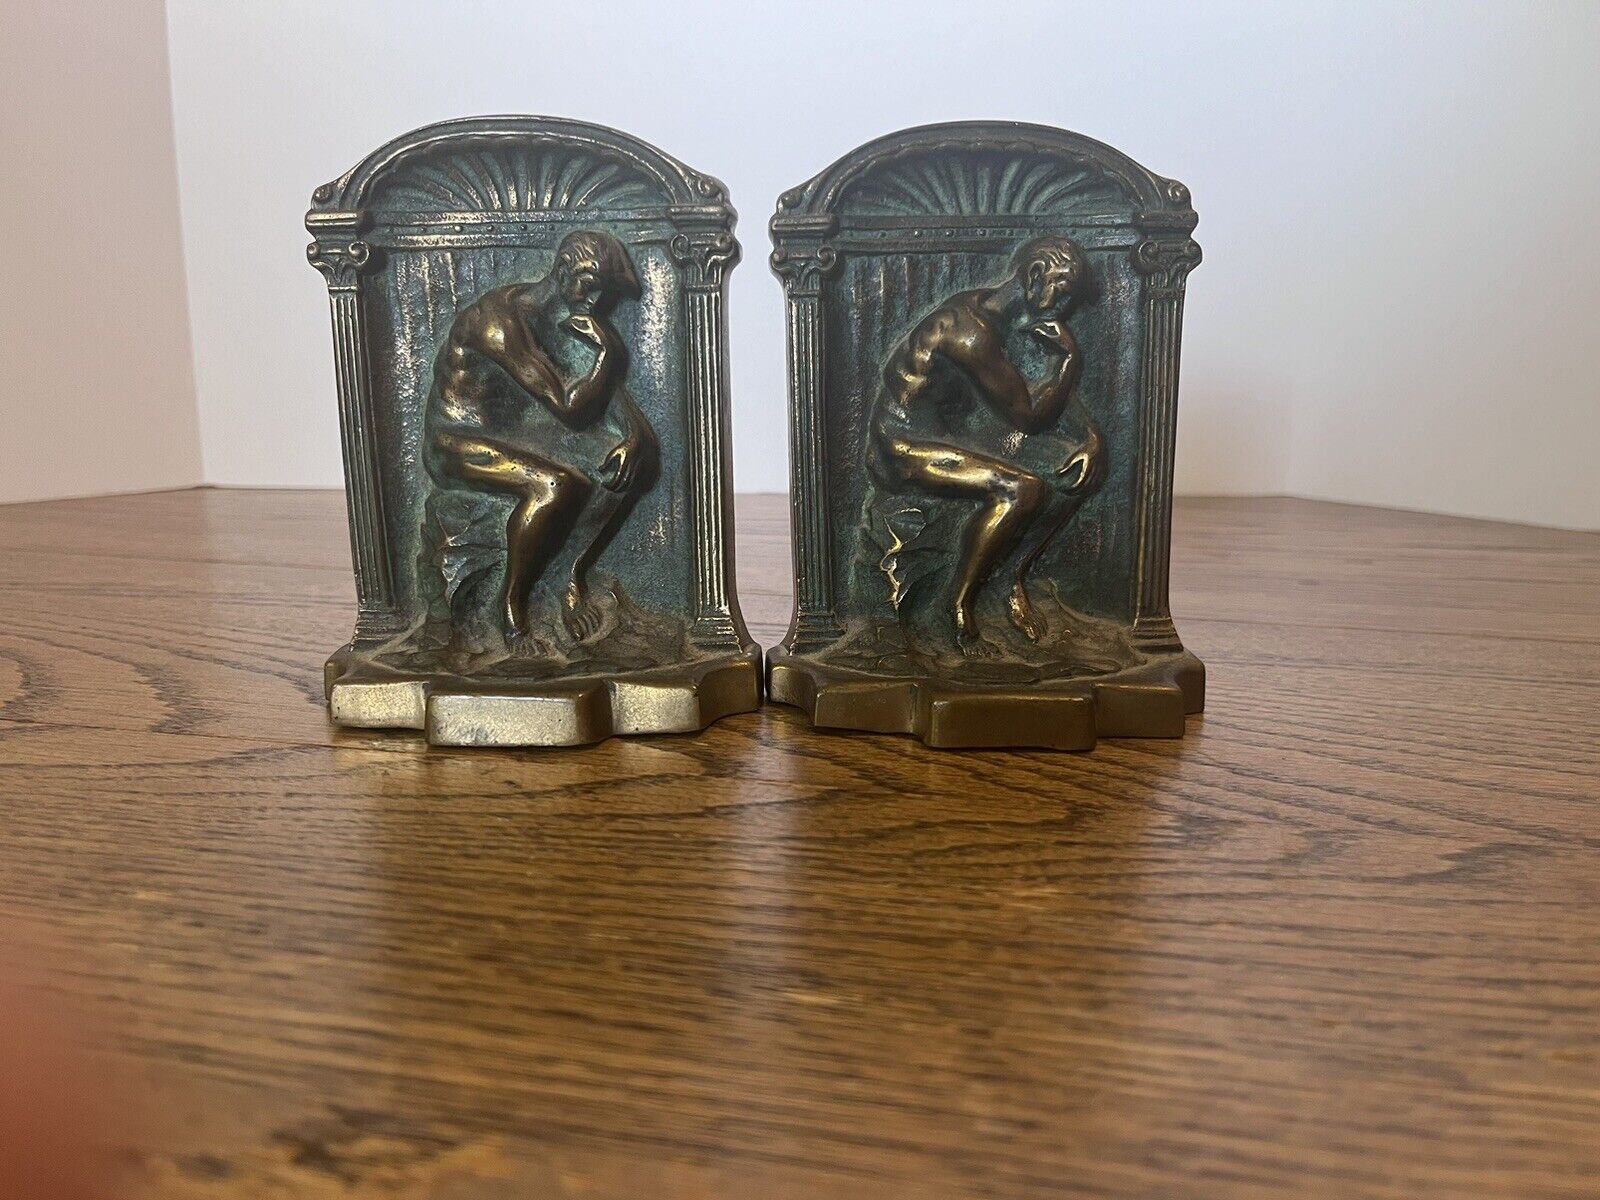 Pair of Antique Bronze “The Thinker” Bookends 1920's Rodin Sculpture 